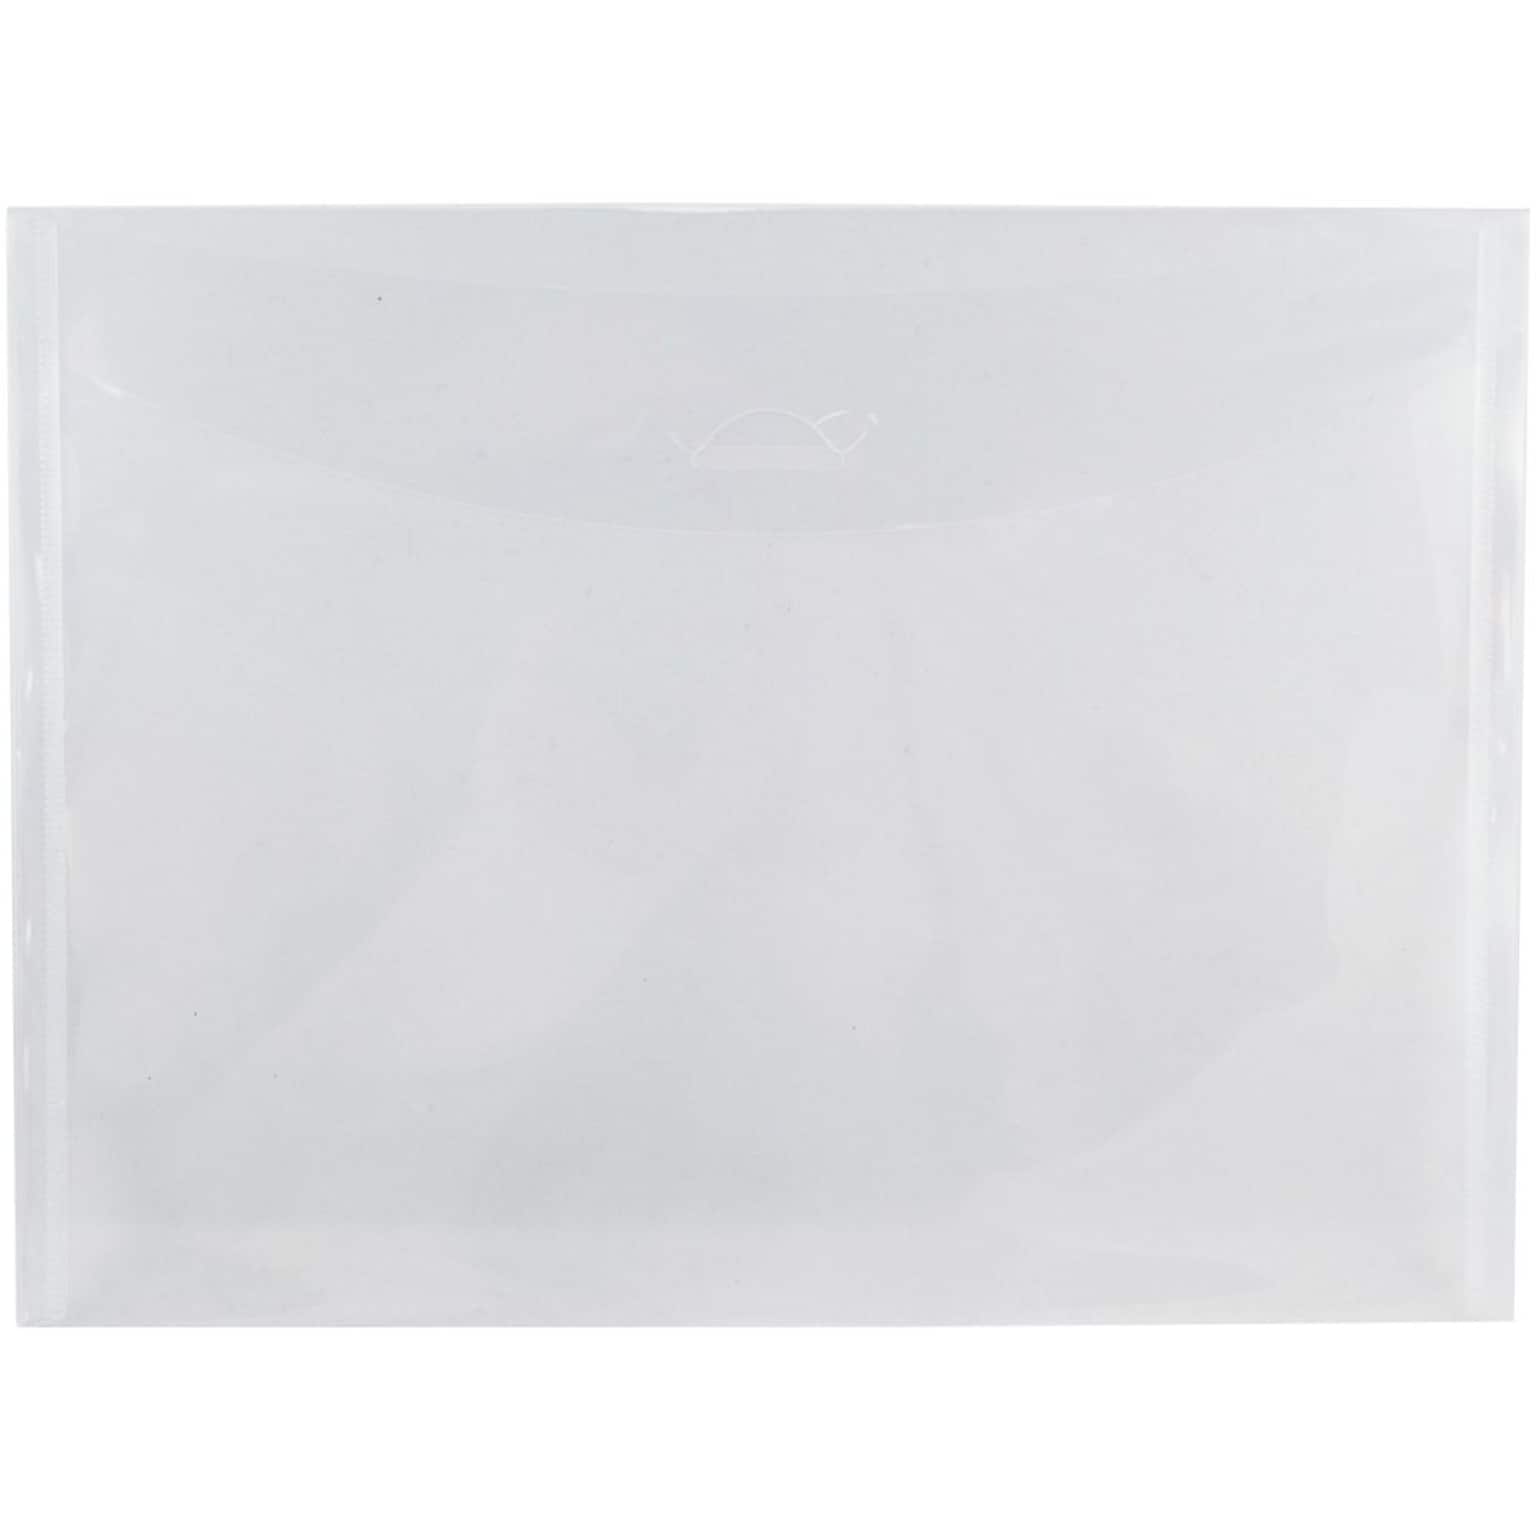 JAM Paper® Plastic Envelopes with Tuck Flap Closure, Letter Booklet, 8 7/8 x 12, Clear Poly, 12/Pack (459SCLEAR)